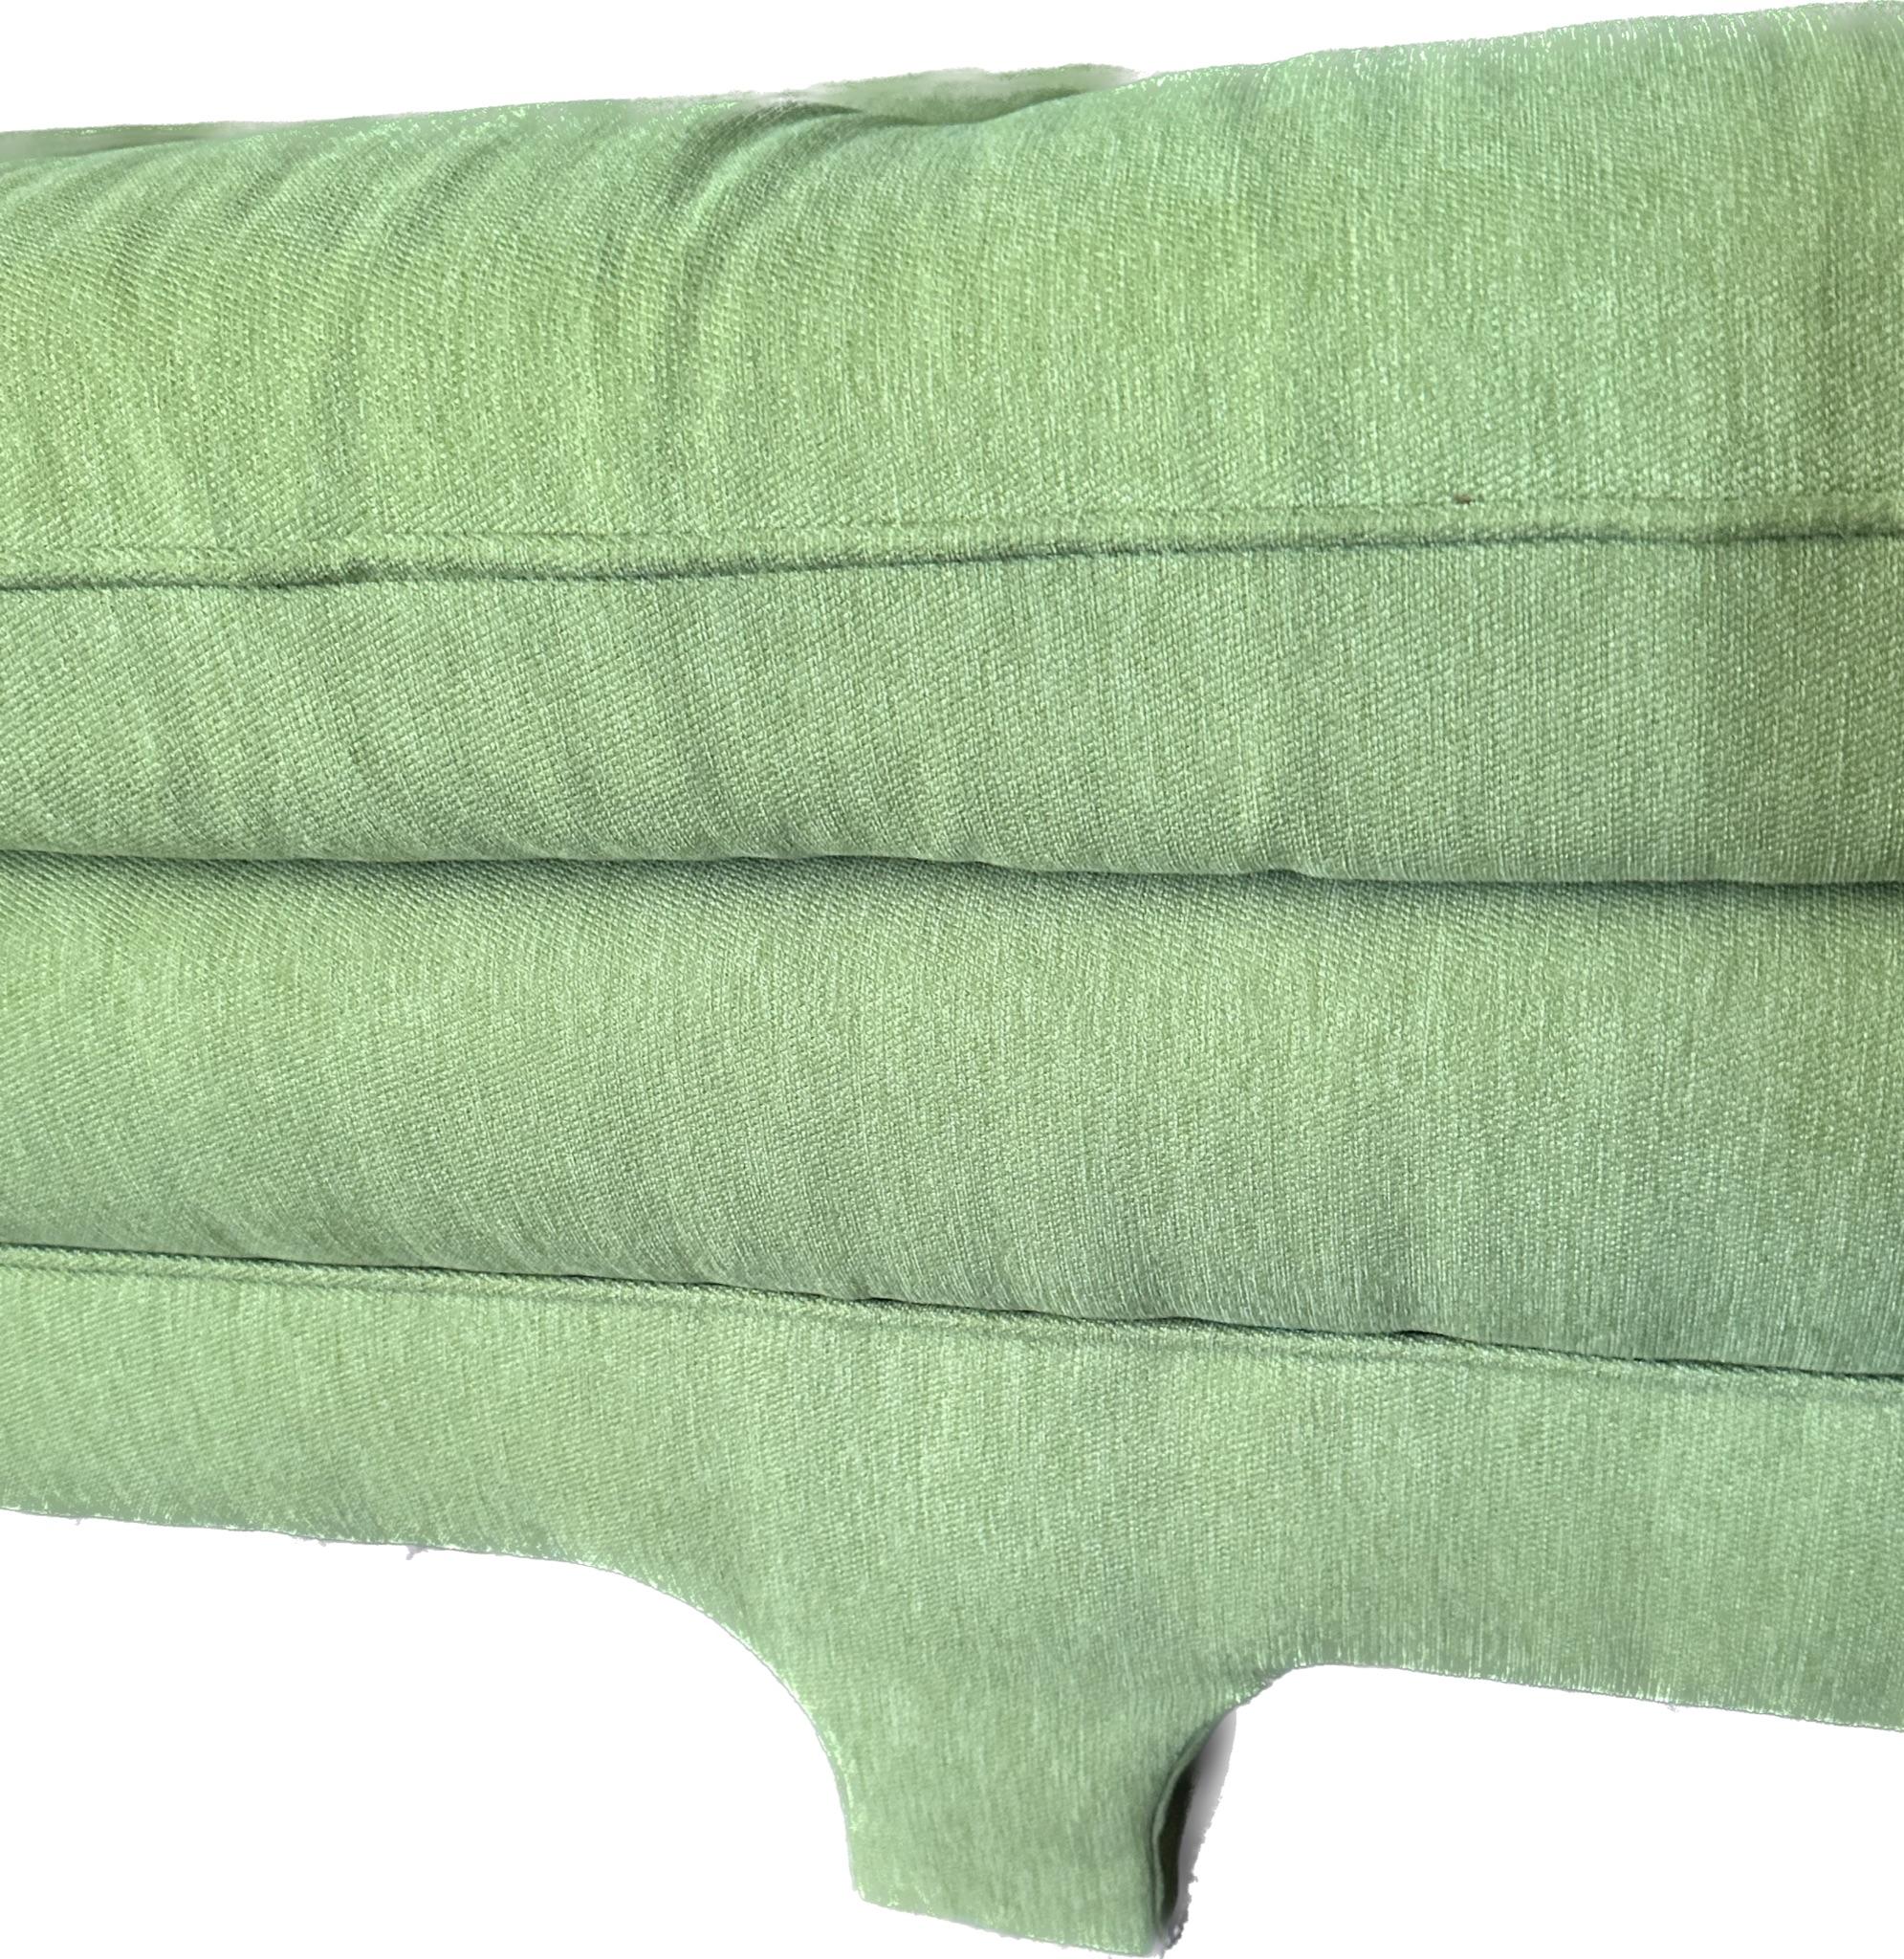 Vintage 70s Bench Seat Sofa Newly Upholstered in Chartreuse Crypton Fabric In Good Condition For Sale In Portage, MI